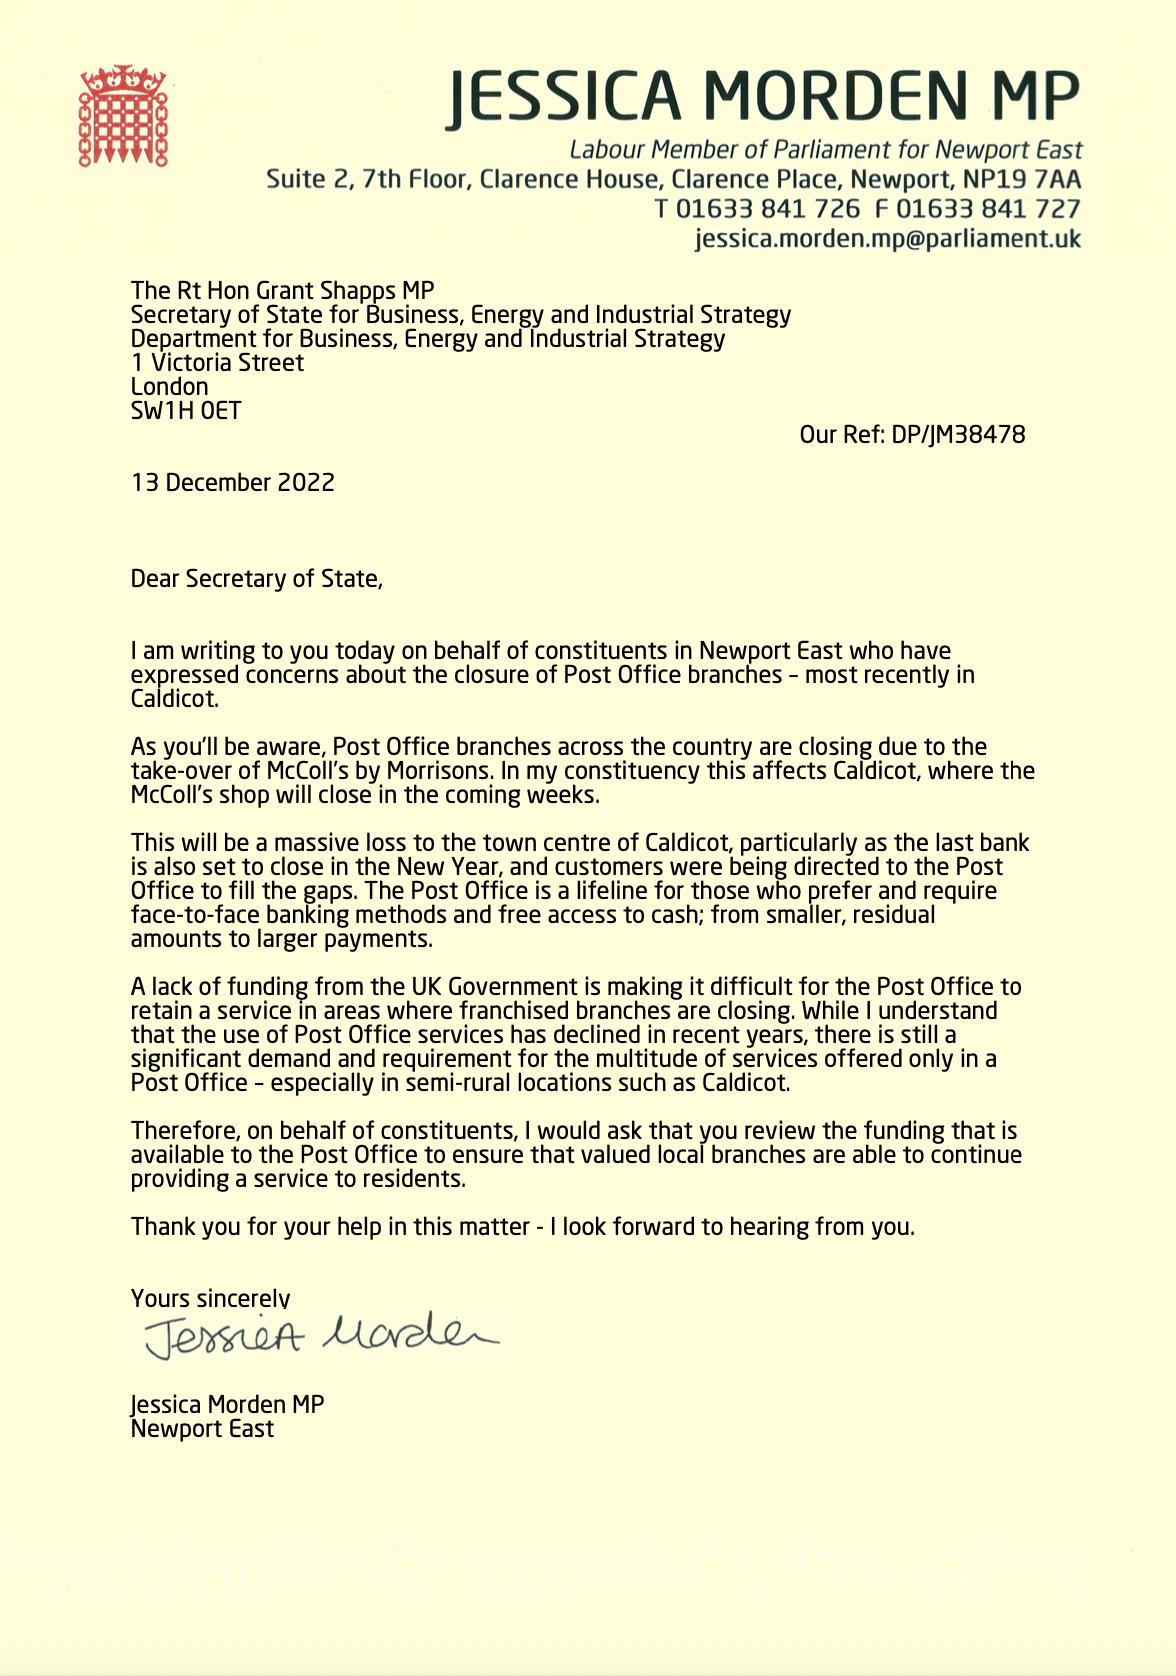 A letter addressed to Grant Shapps asking him to up the funding to Post Offices so that when franchised branches closed the Post Office might be able to open new branches. 